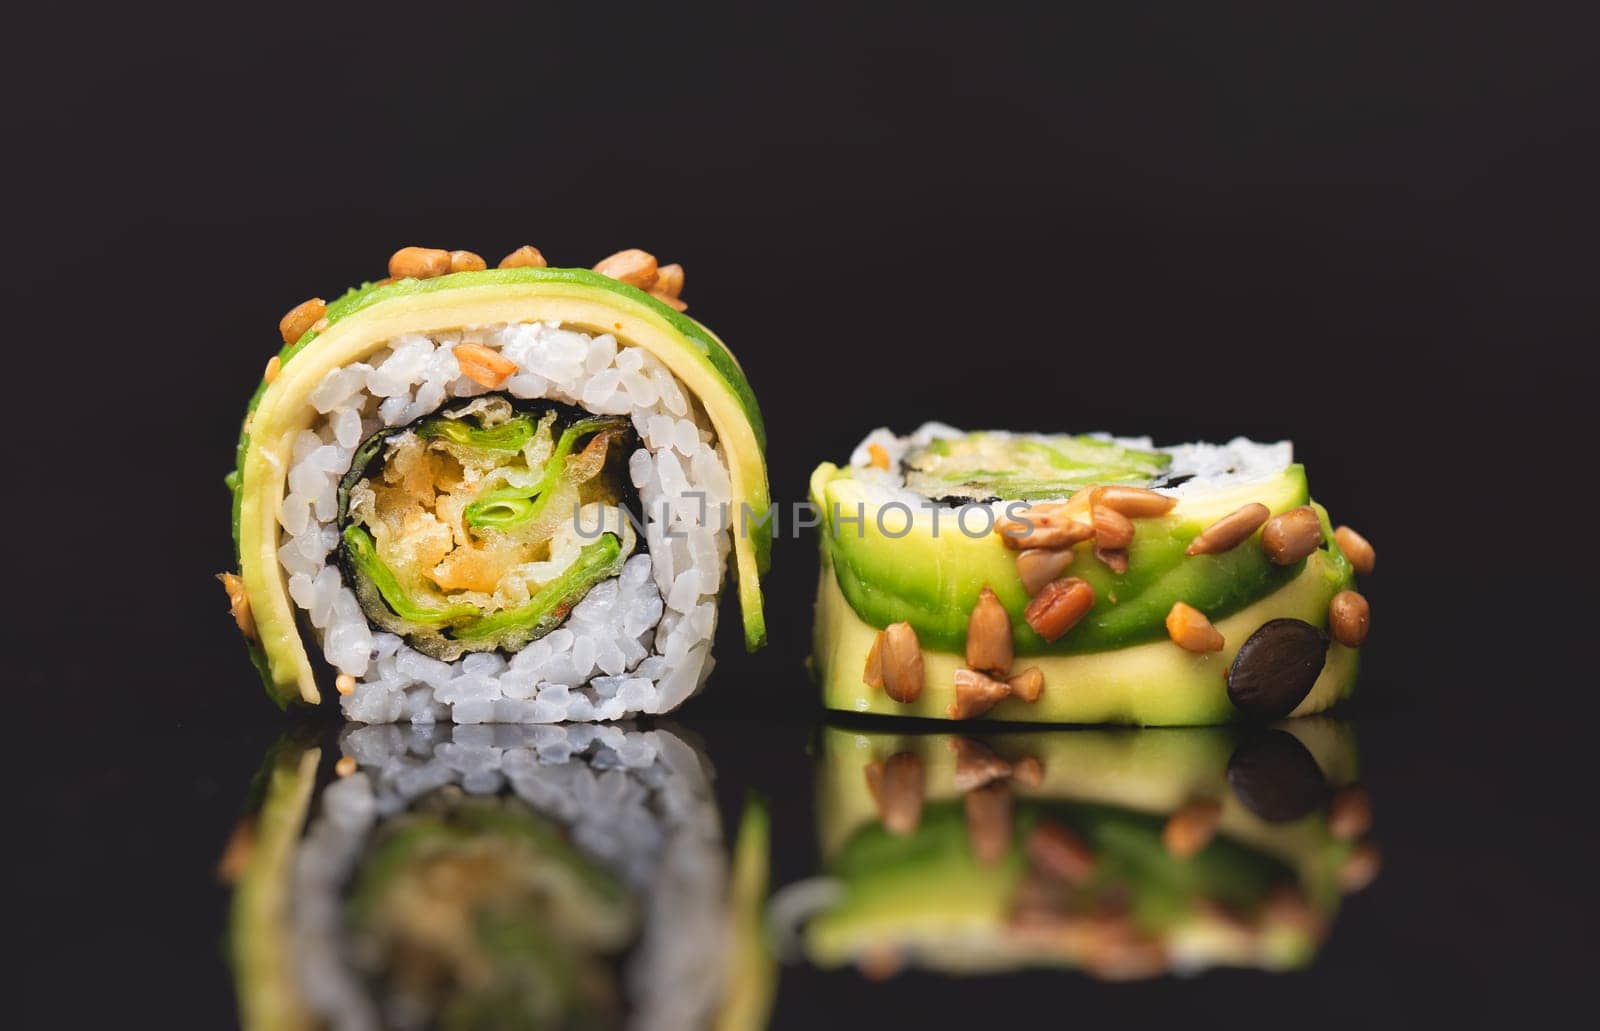 Sushi roll set on black glass background by simpson33